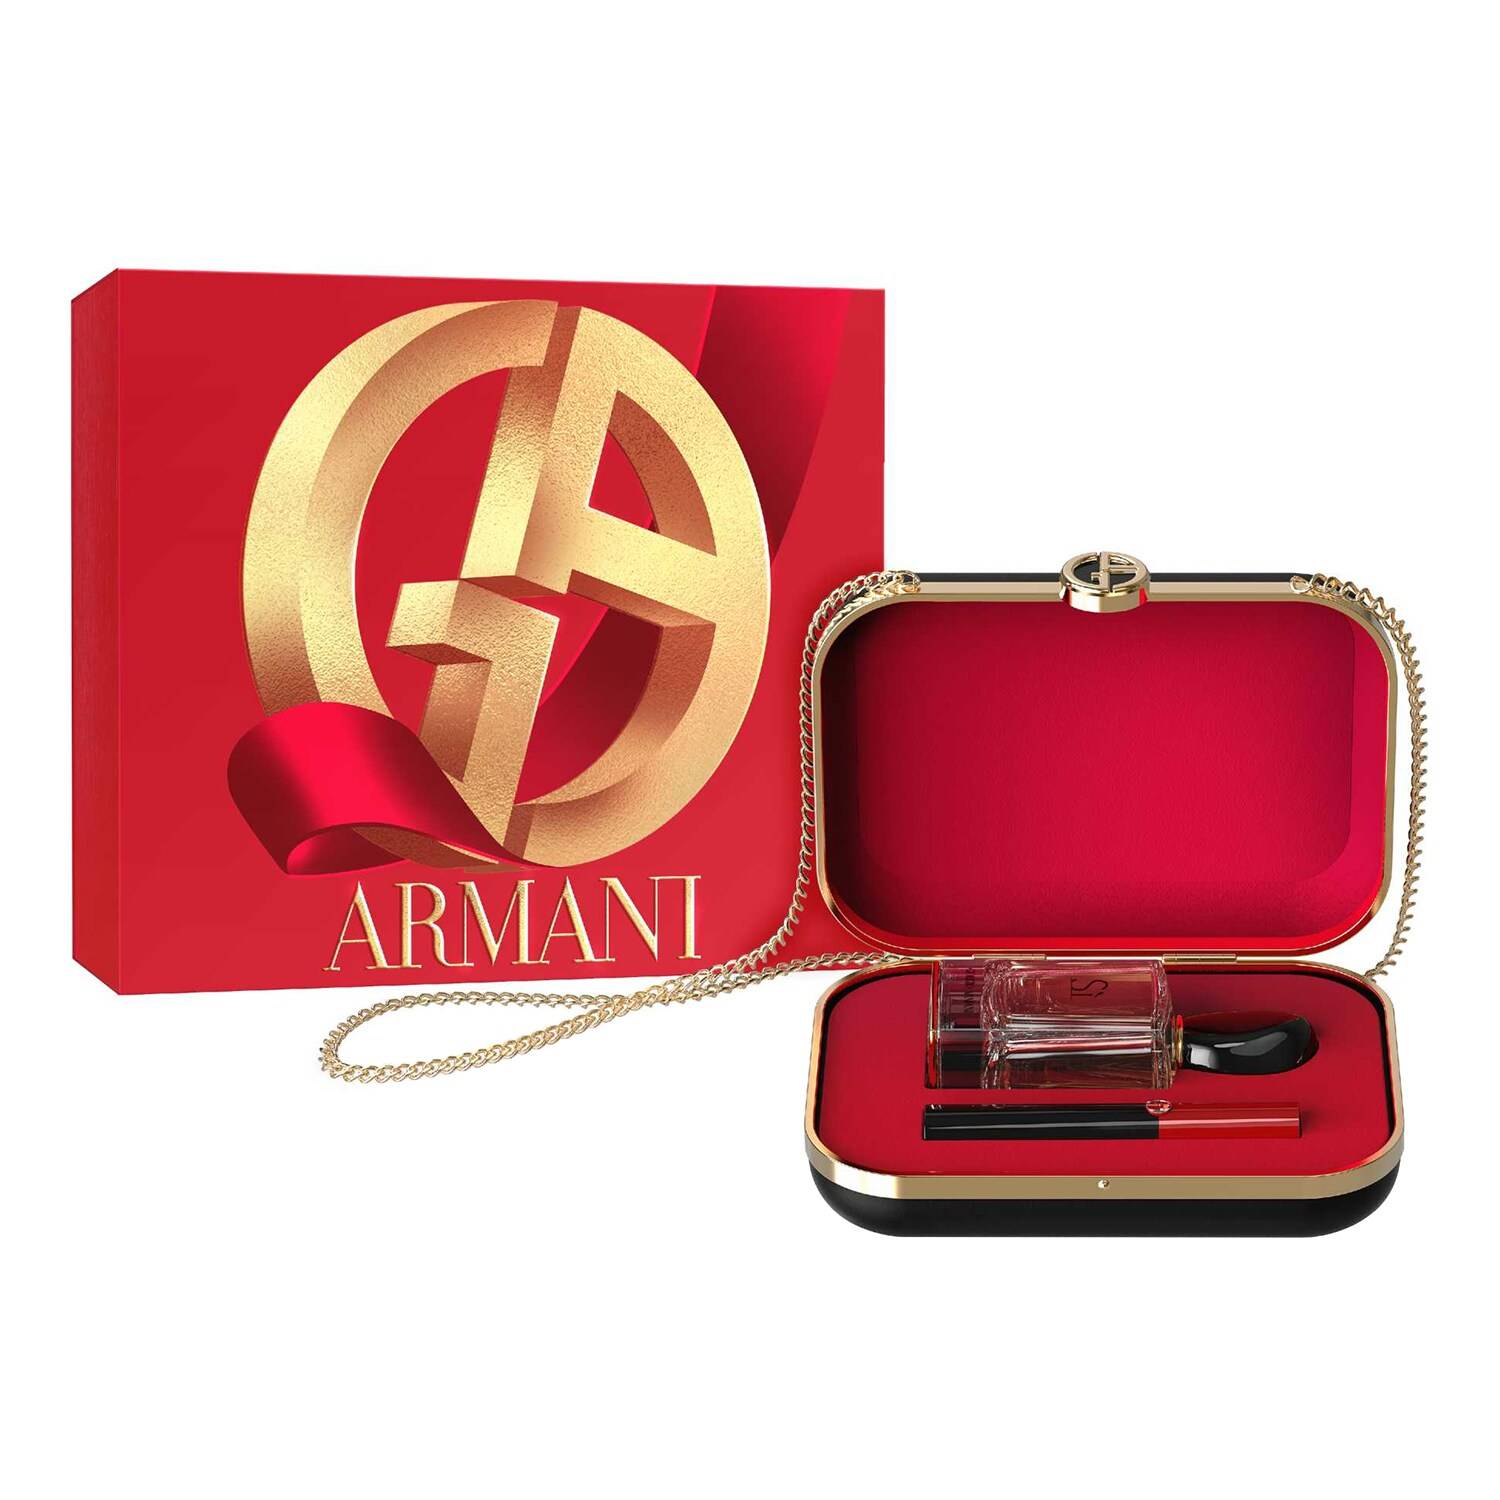 Armani Si Eau De Parfum And Lip Power Giftset For Her